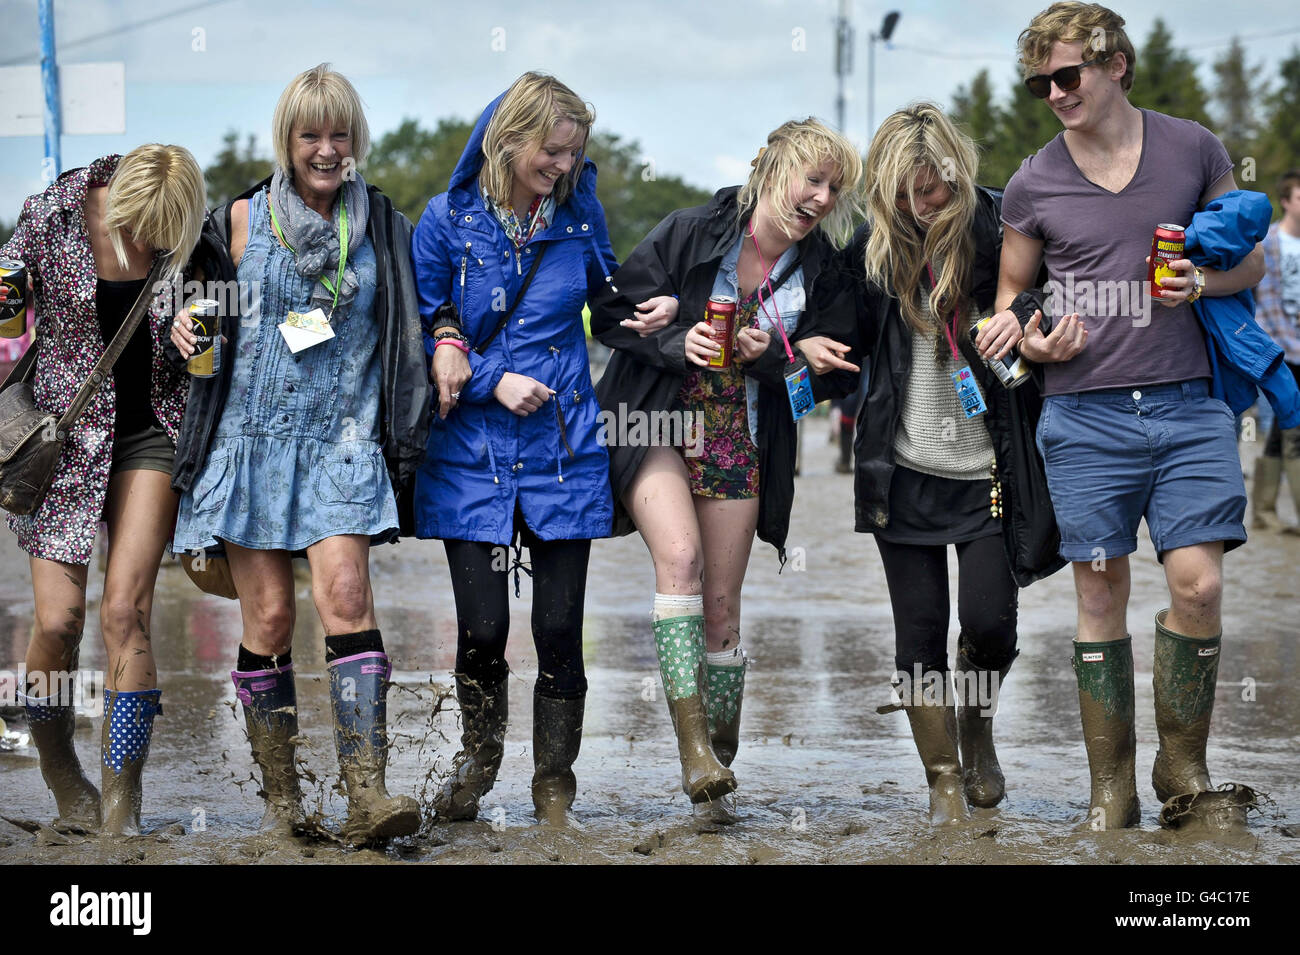 Friends from Torquay splash in the mud at the Glastonbury Festival in Somerset. Stock Photo